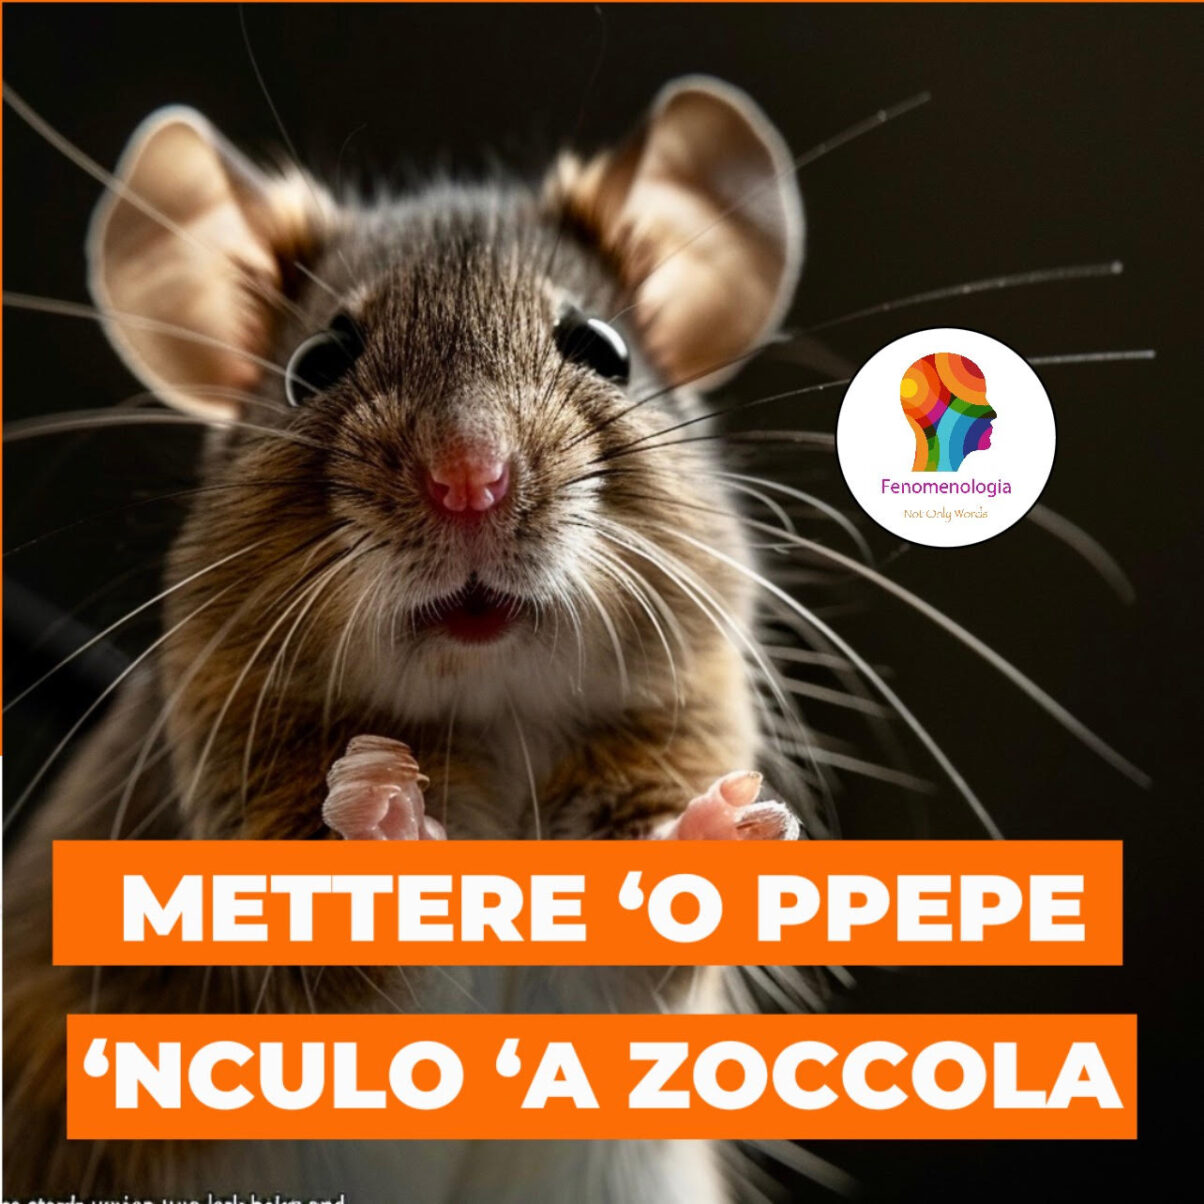 mettere 'o ppepe nculo 'a zoccola